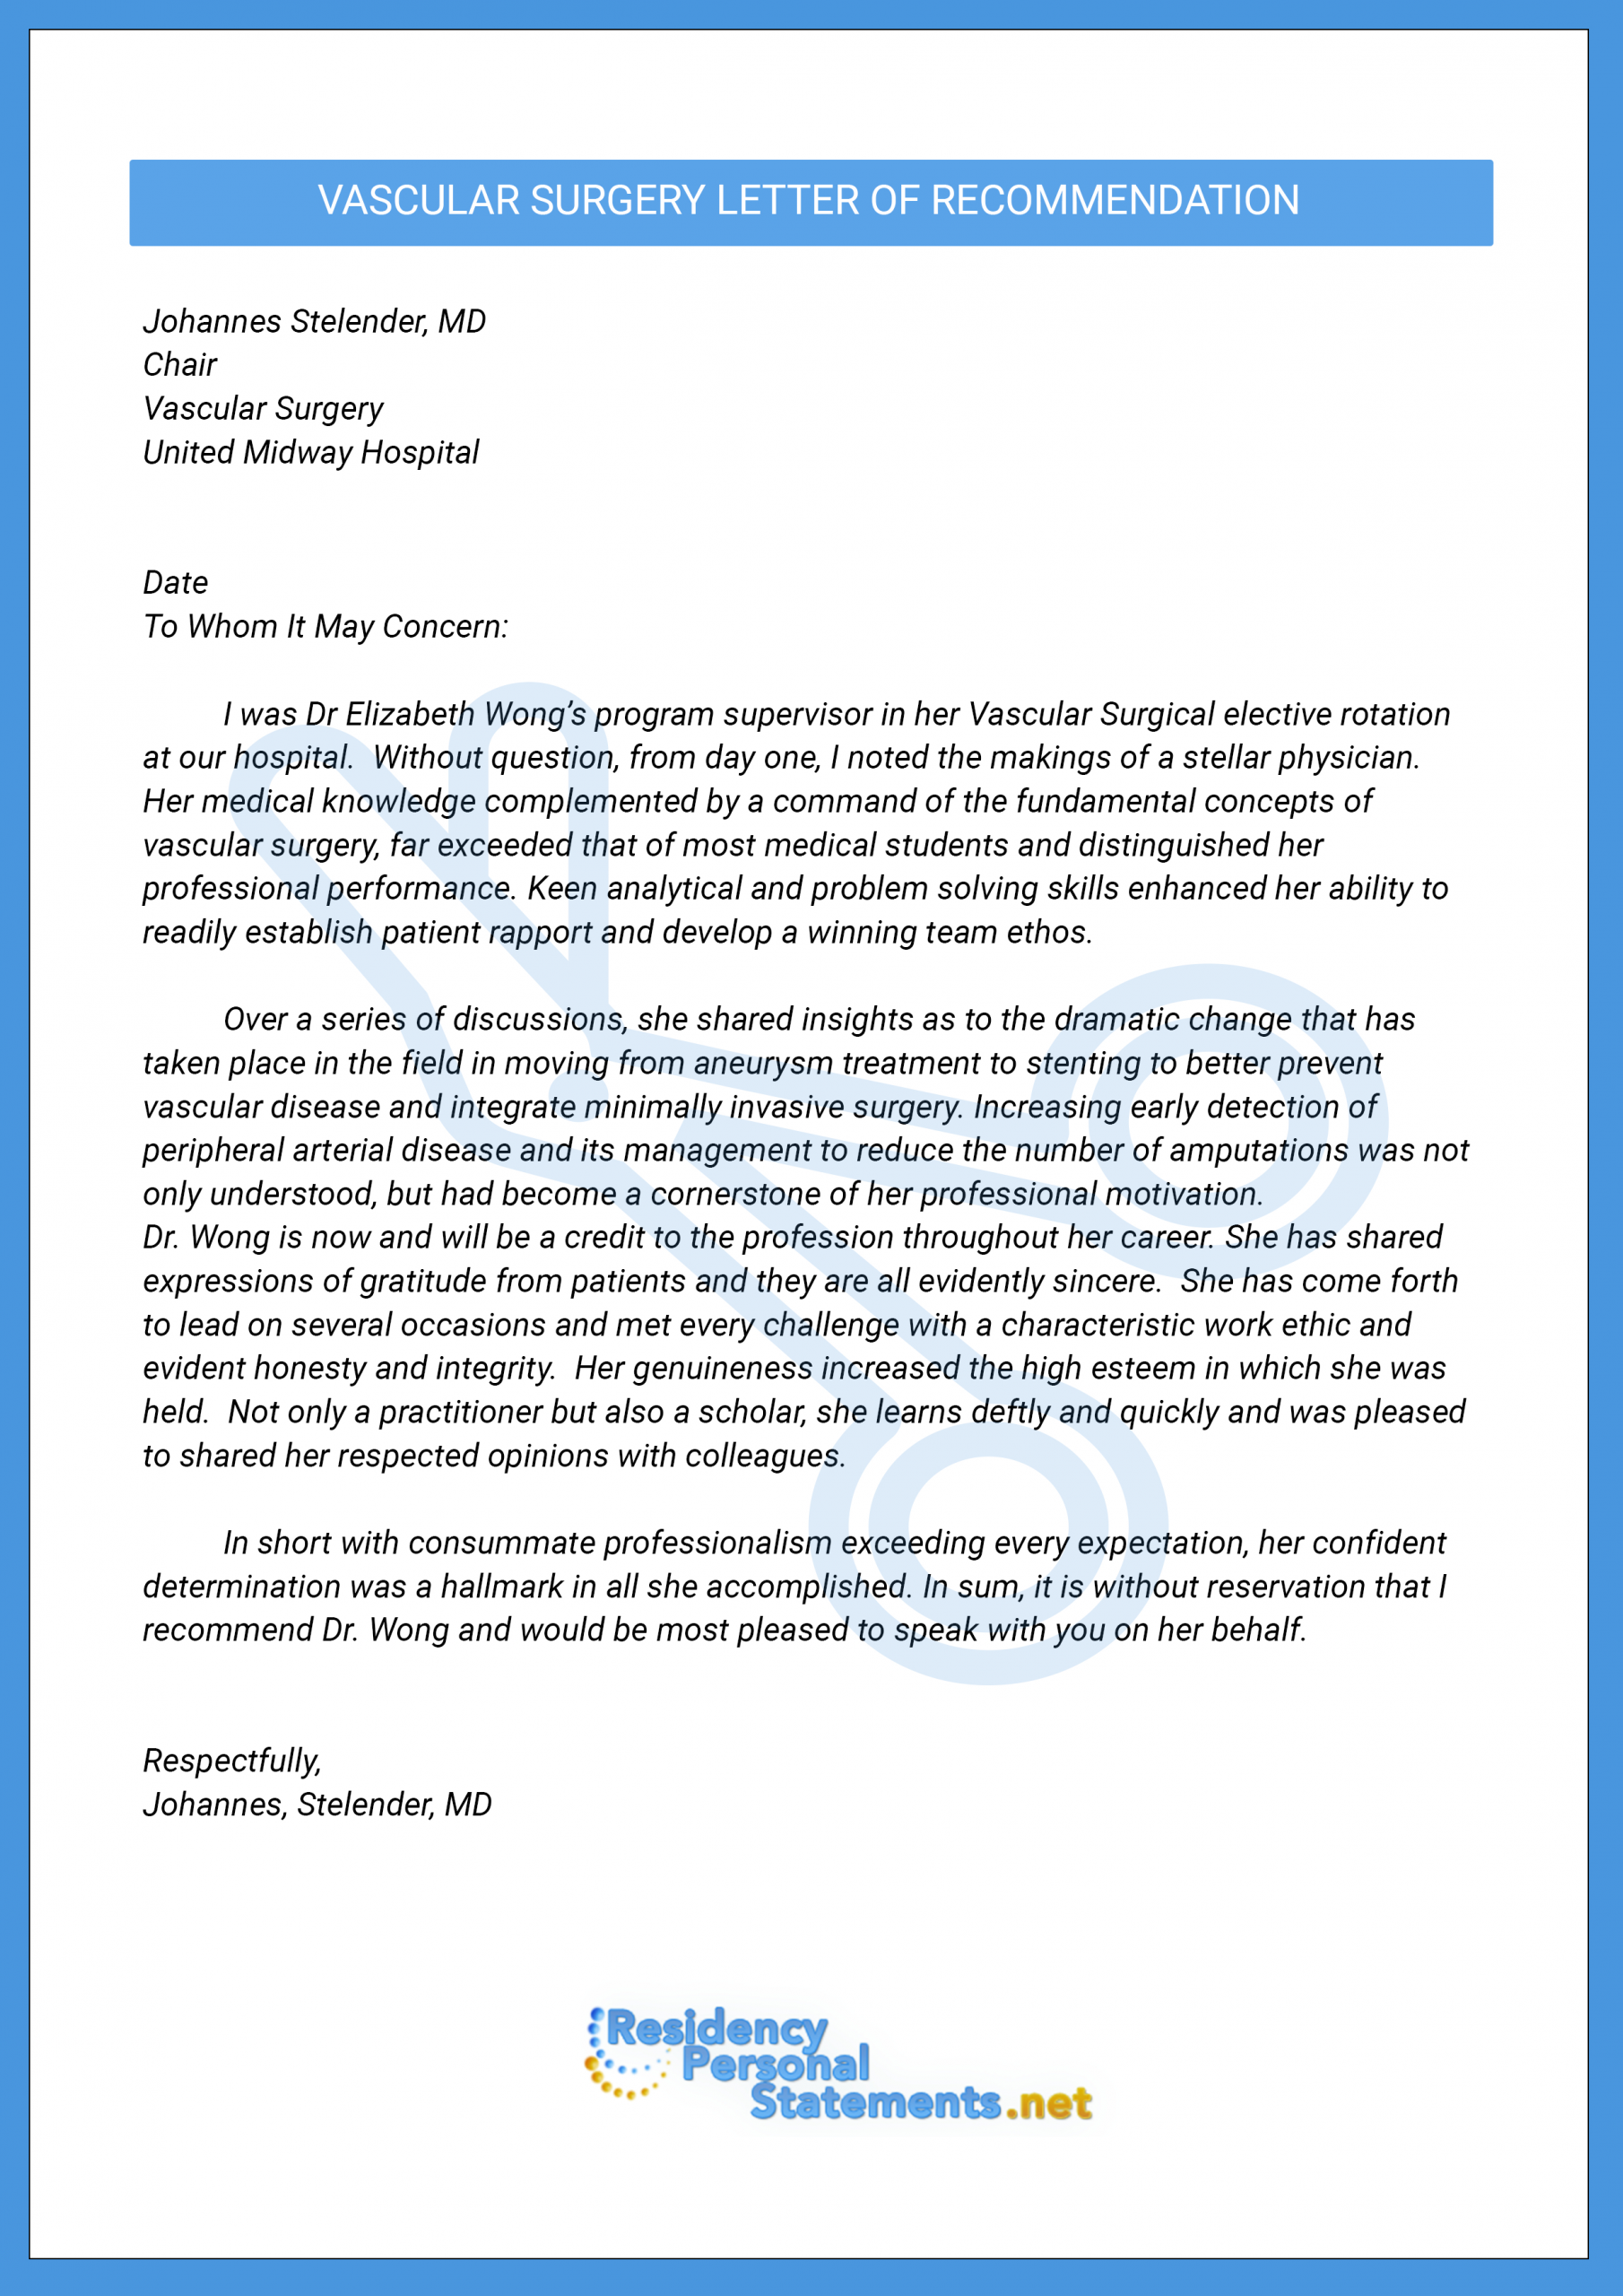 Residency Letter Of Recommendation Writing Help inside measurements 2480 X 3508